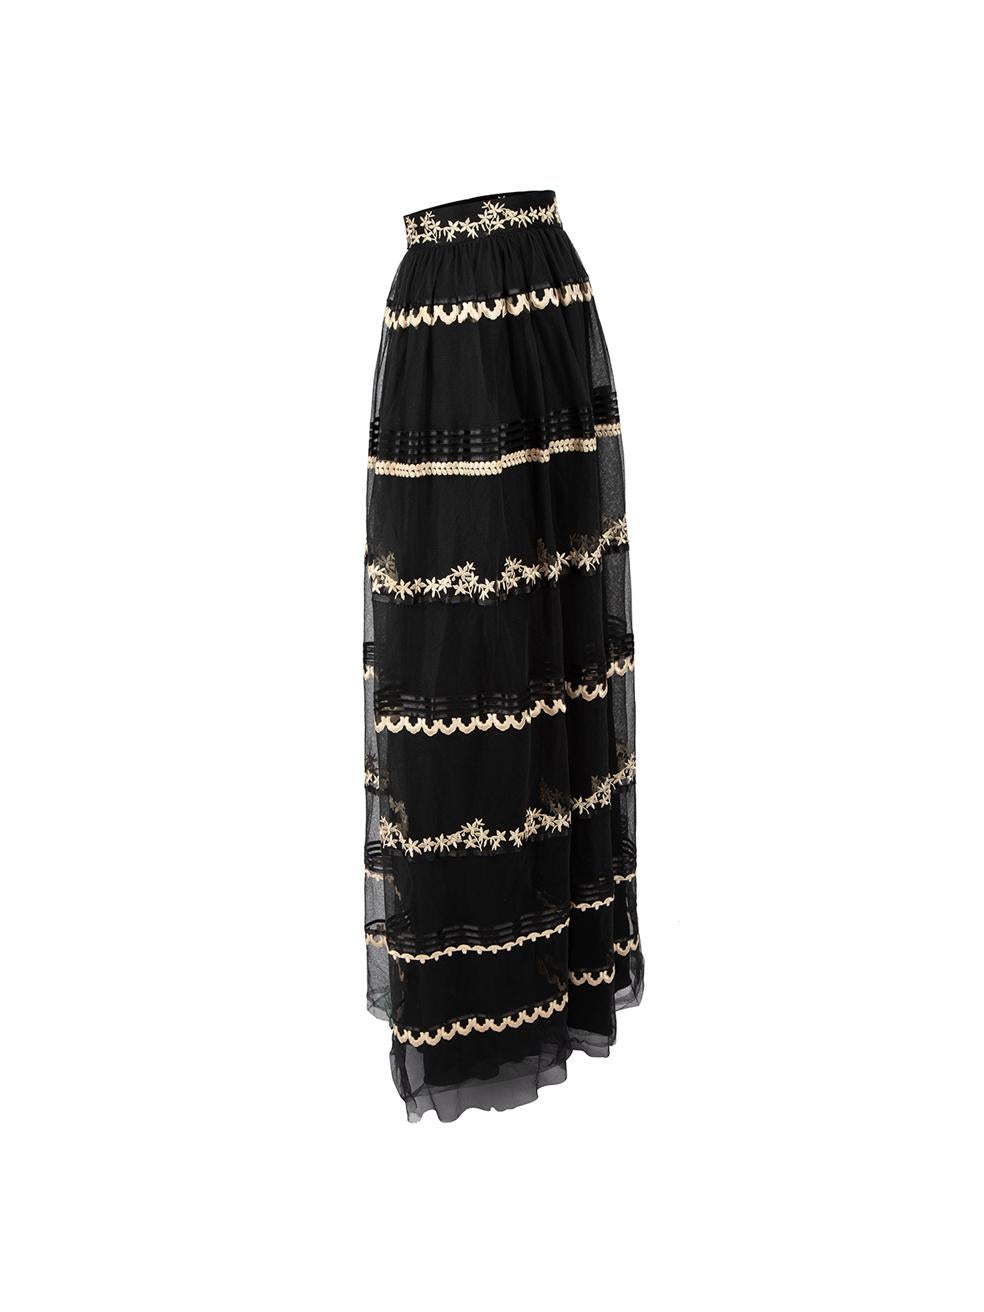 CONDITION is Good. General wear to skirt is evident. Moderate signs of wear to tulle layer with slight rips around the bottom of skirt on this used Temperley designer resale item.



Details


Black

Polyester

Full skirt

Layered tulle

Beige